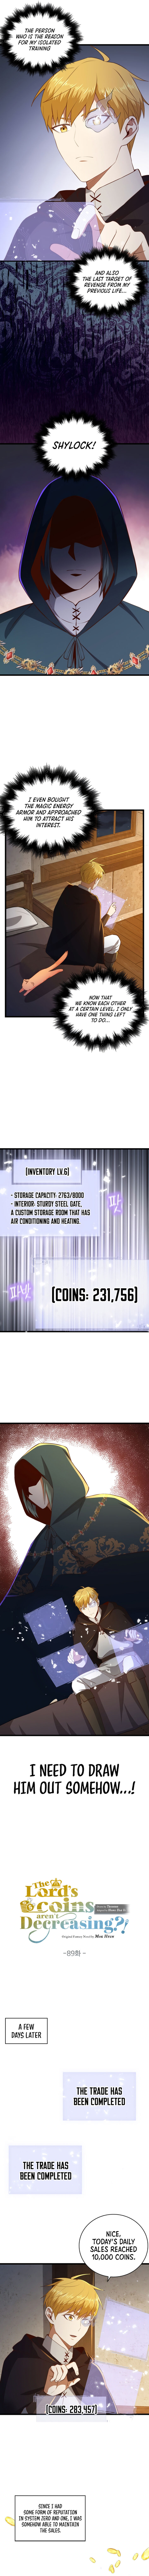 the_lords_coins_arent_decreasing_89_3